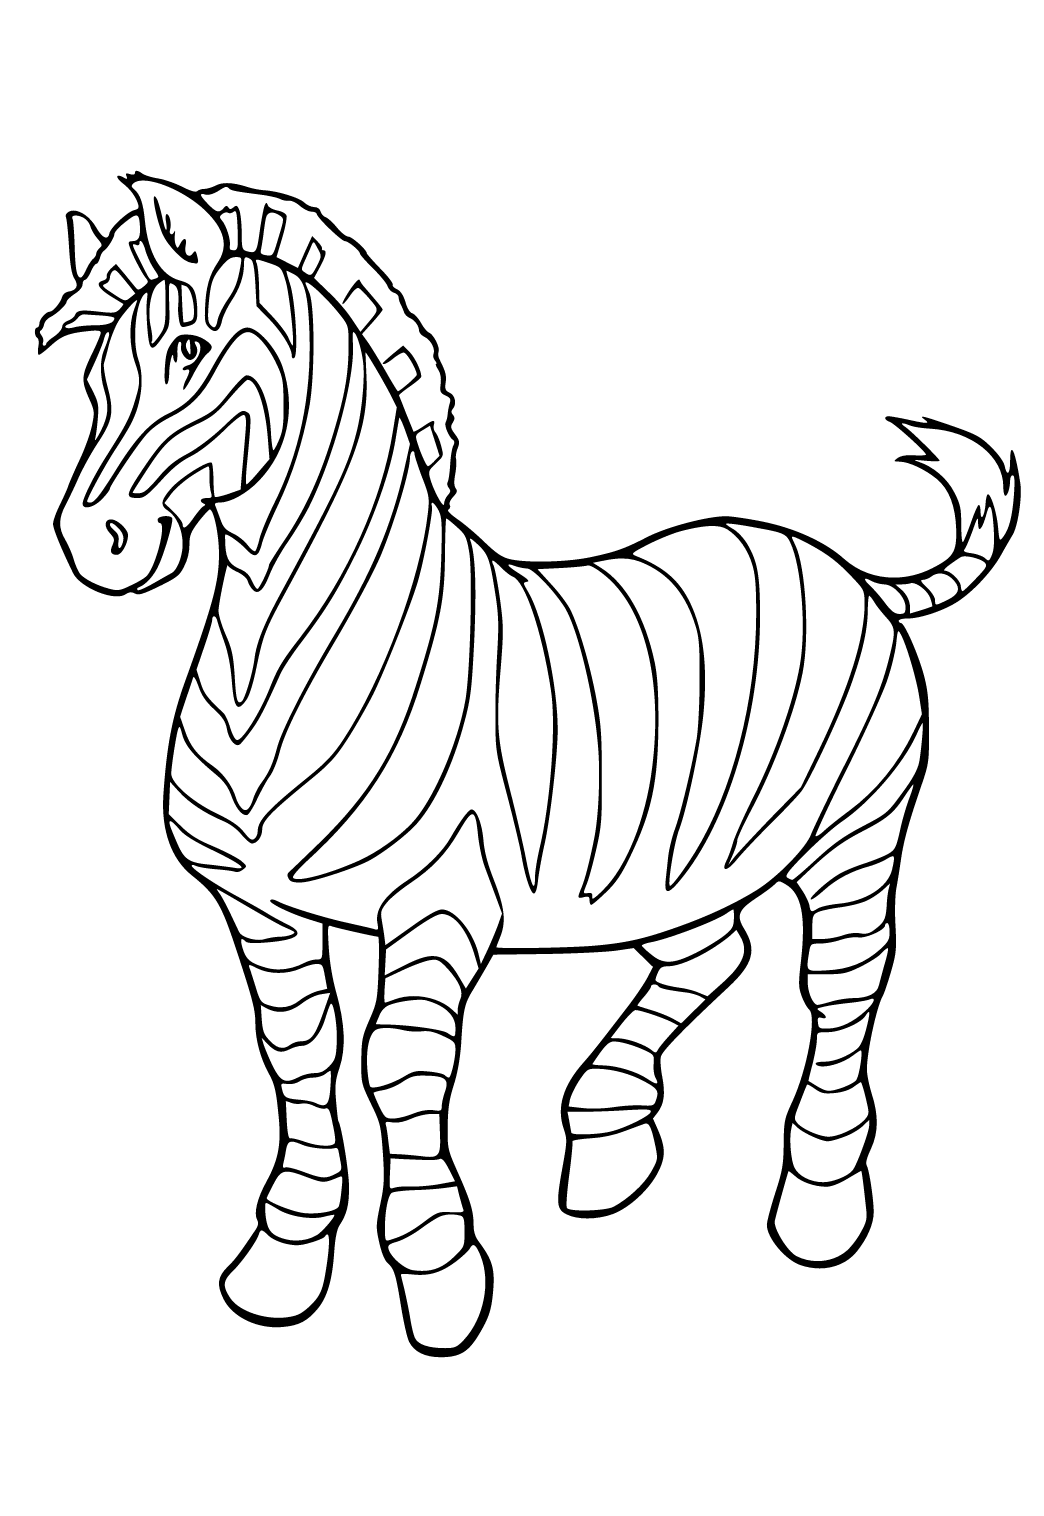 Free printable zebra easy coloring page for adults and kids